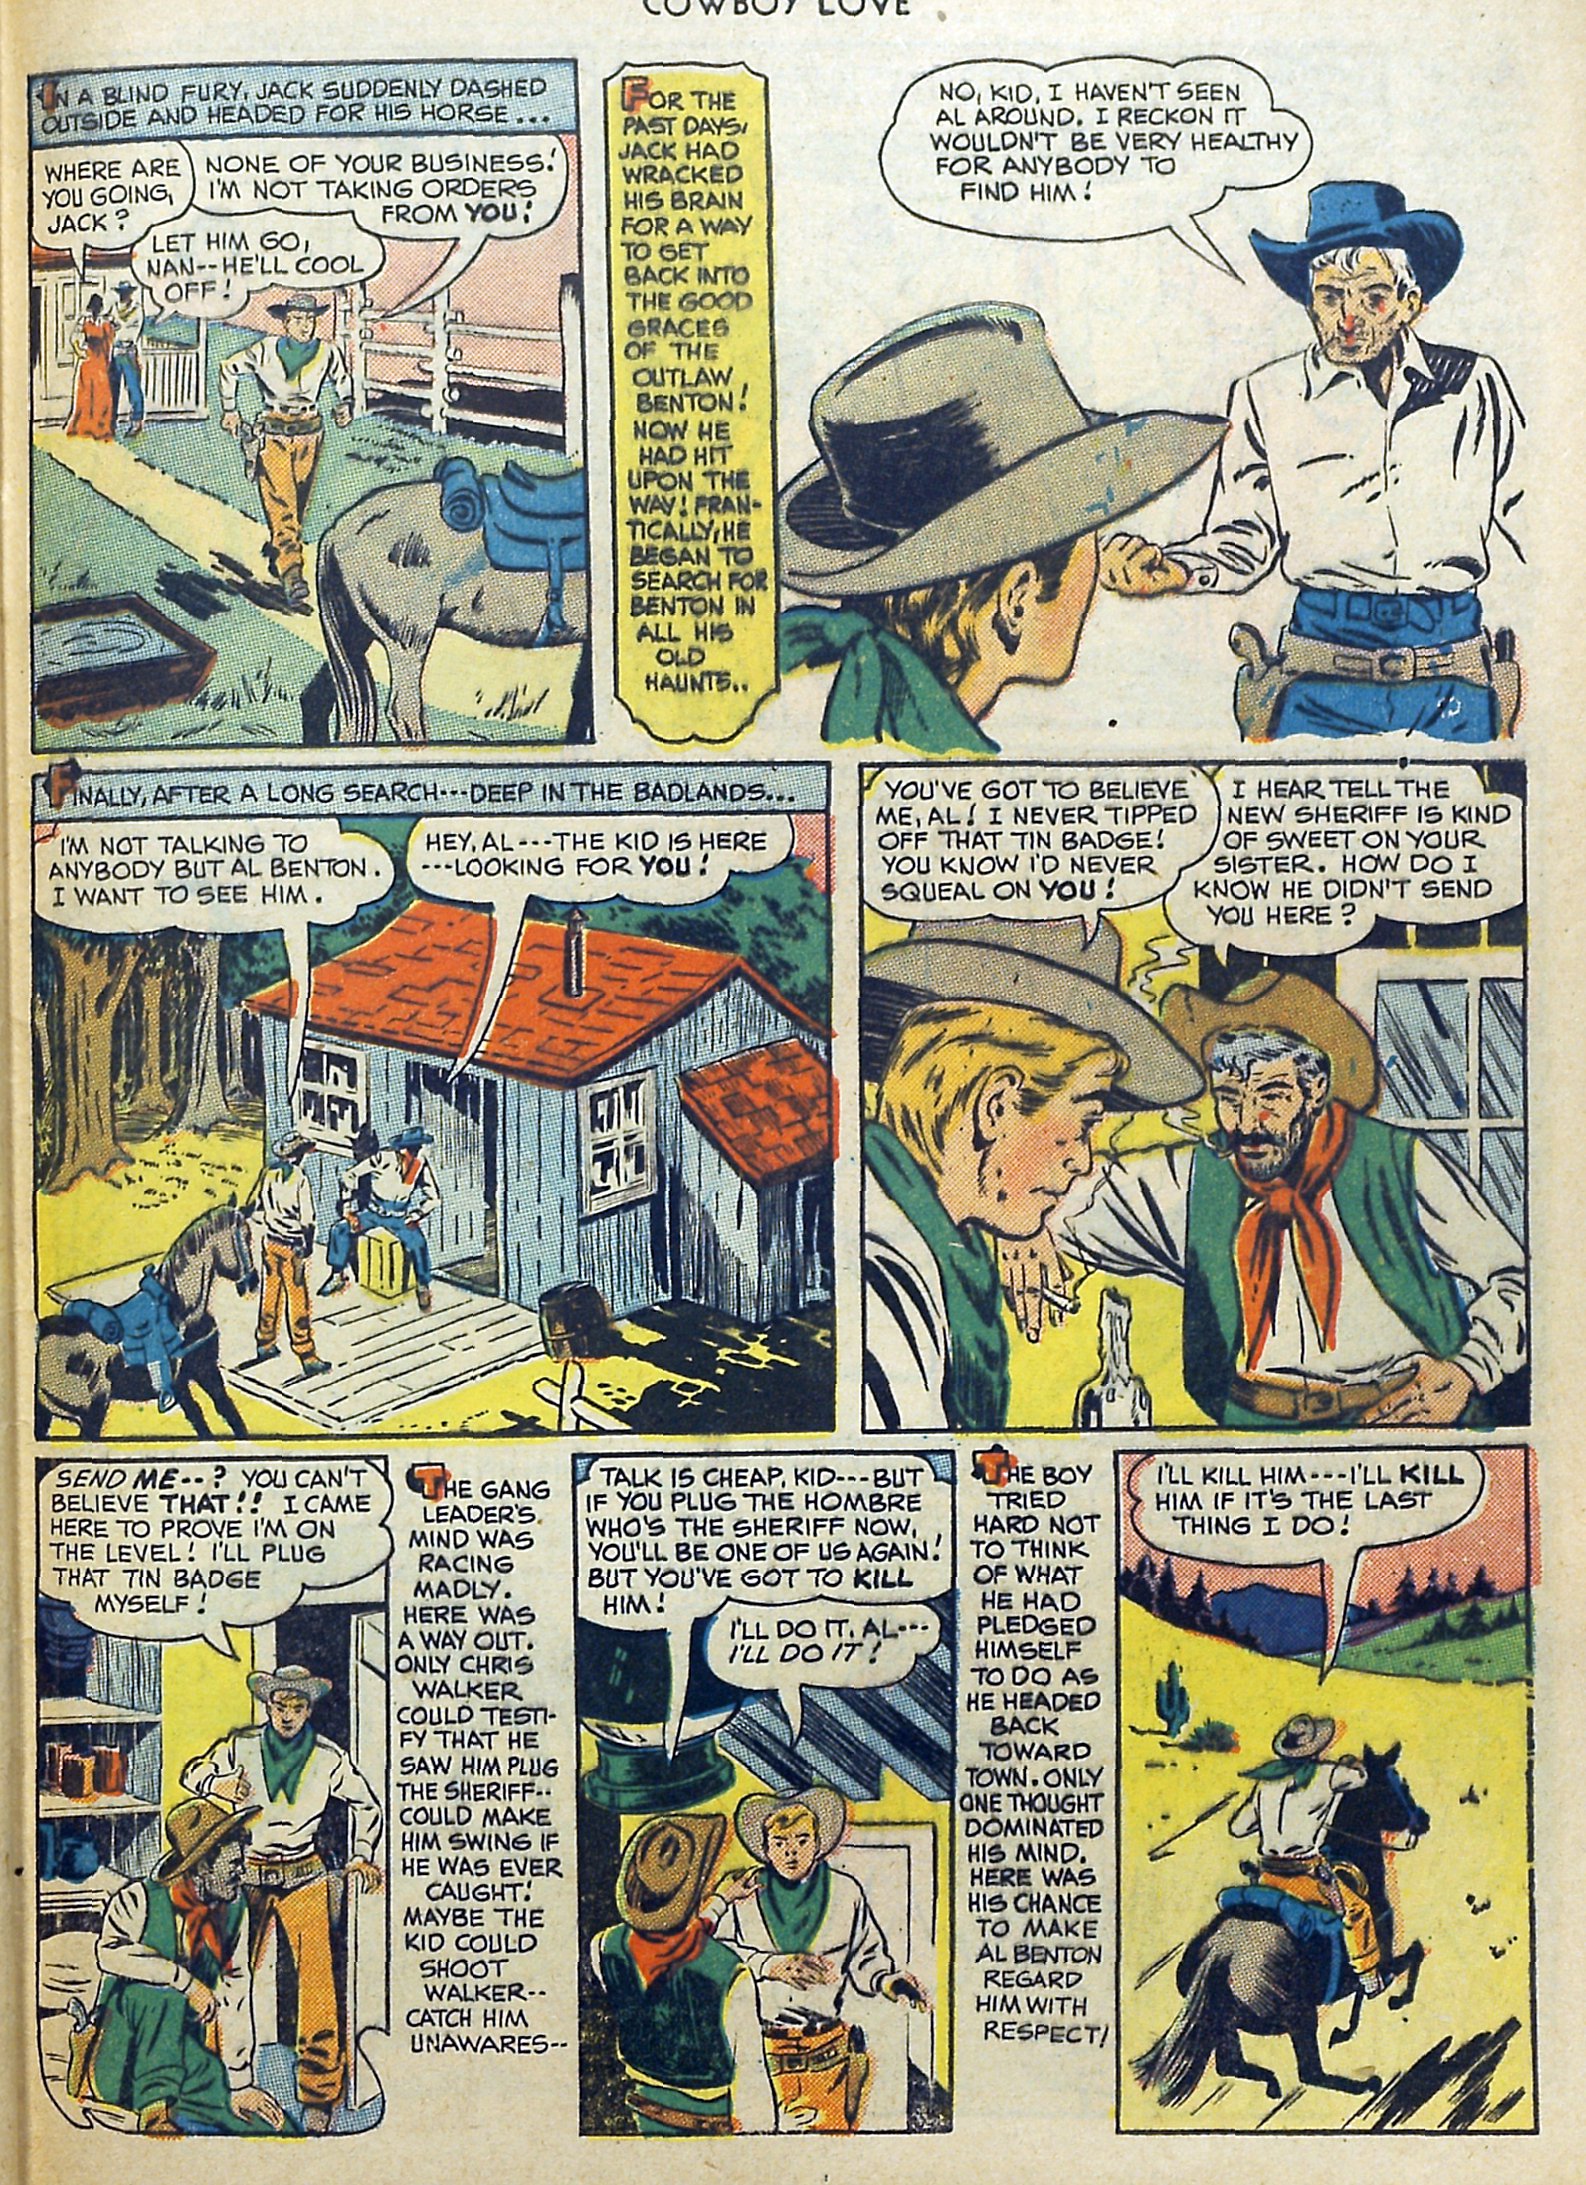 Read online Cowboy Love comic -  Issue #9 - 45